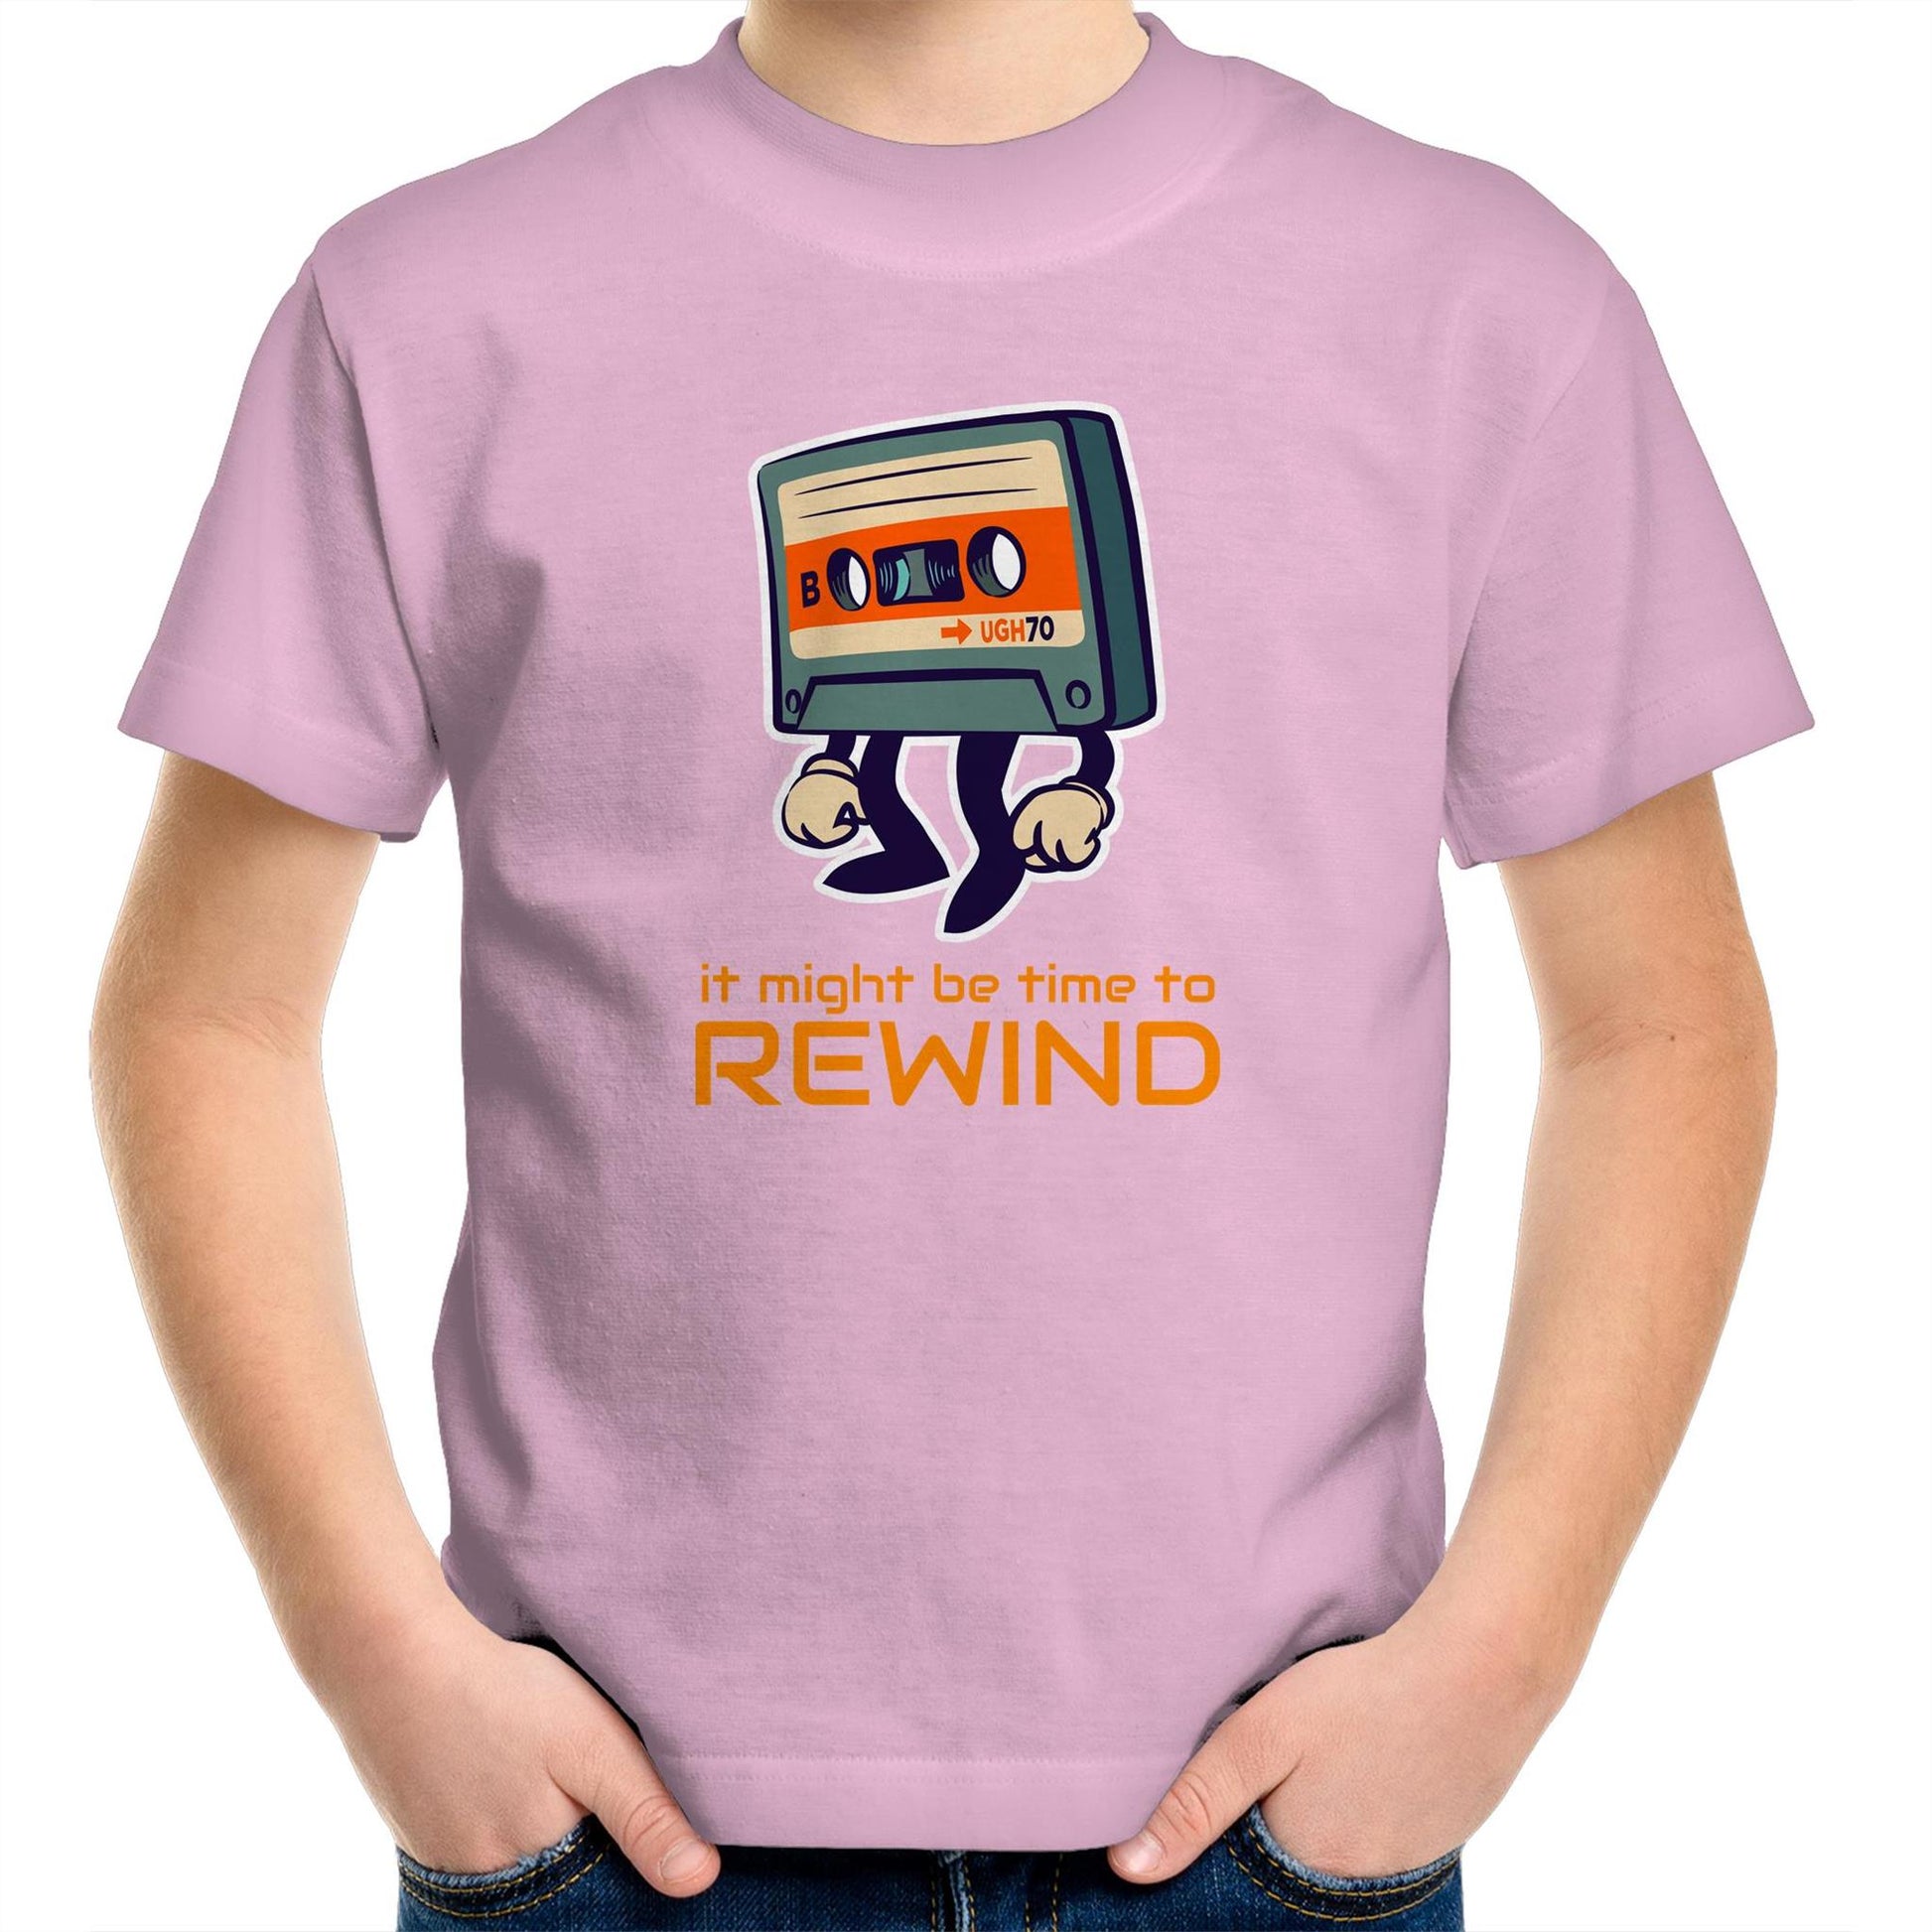 It Might Be Time To Rewind - Kids Youth Crew T-Shirt Pink Kids Youth T-shirt Music Retro